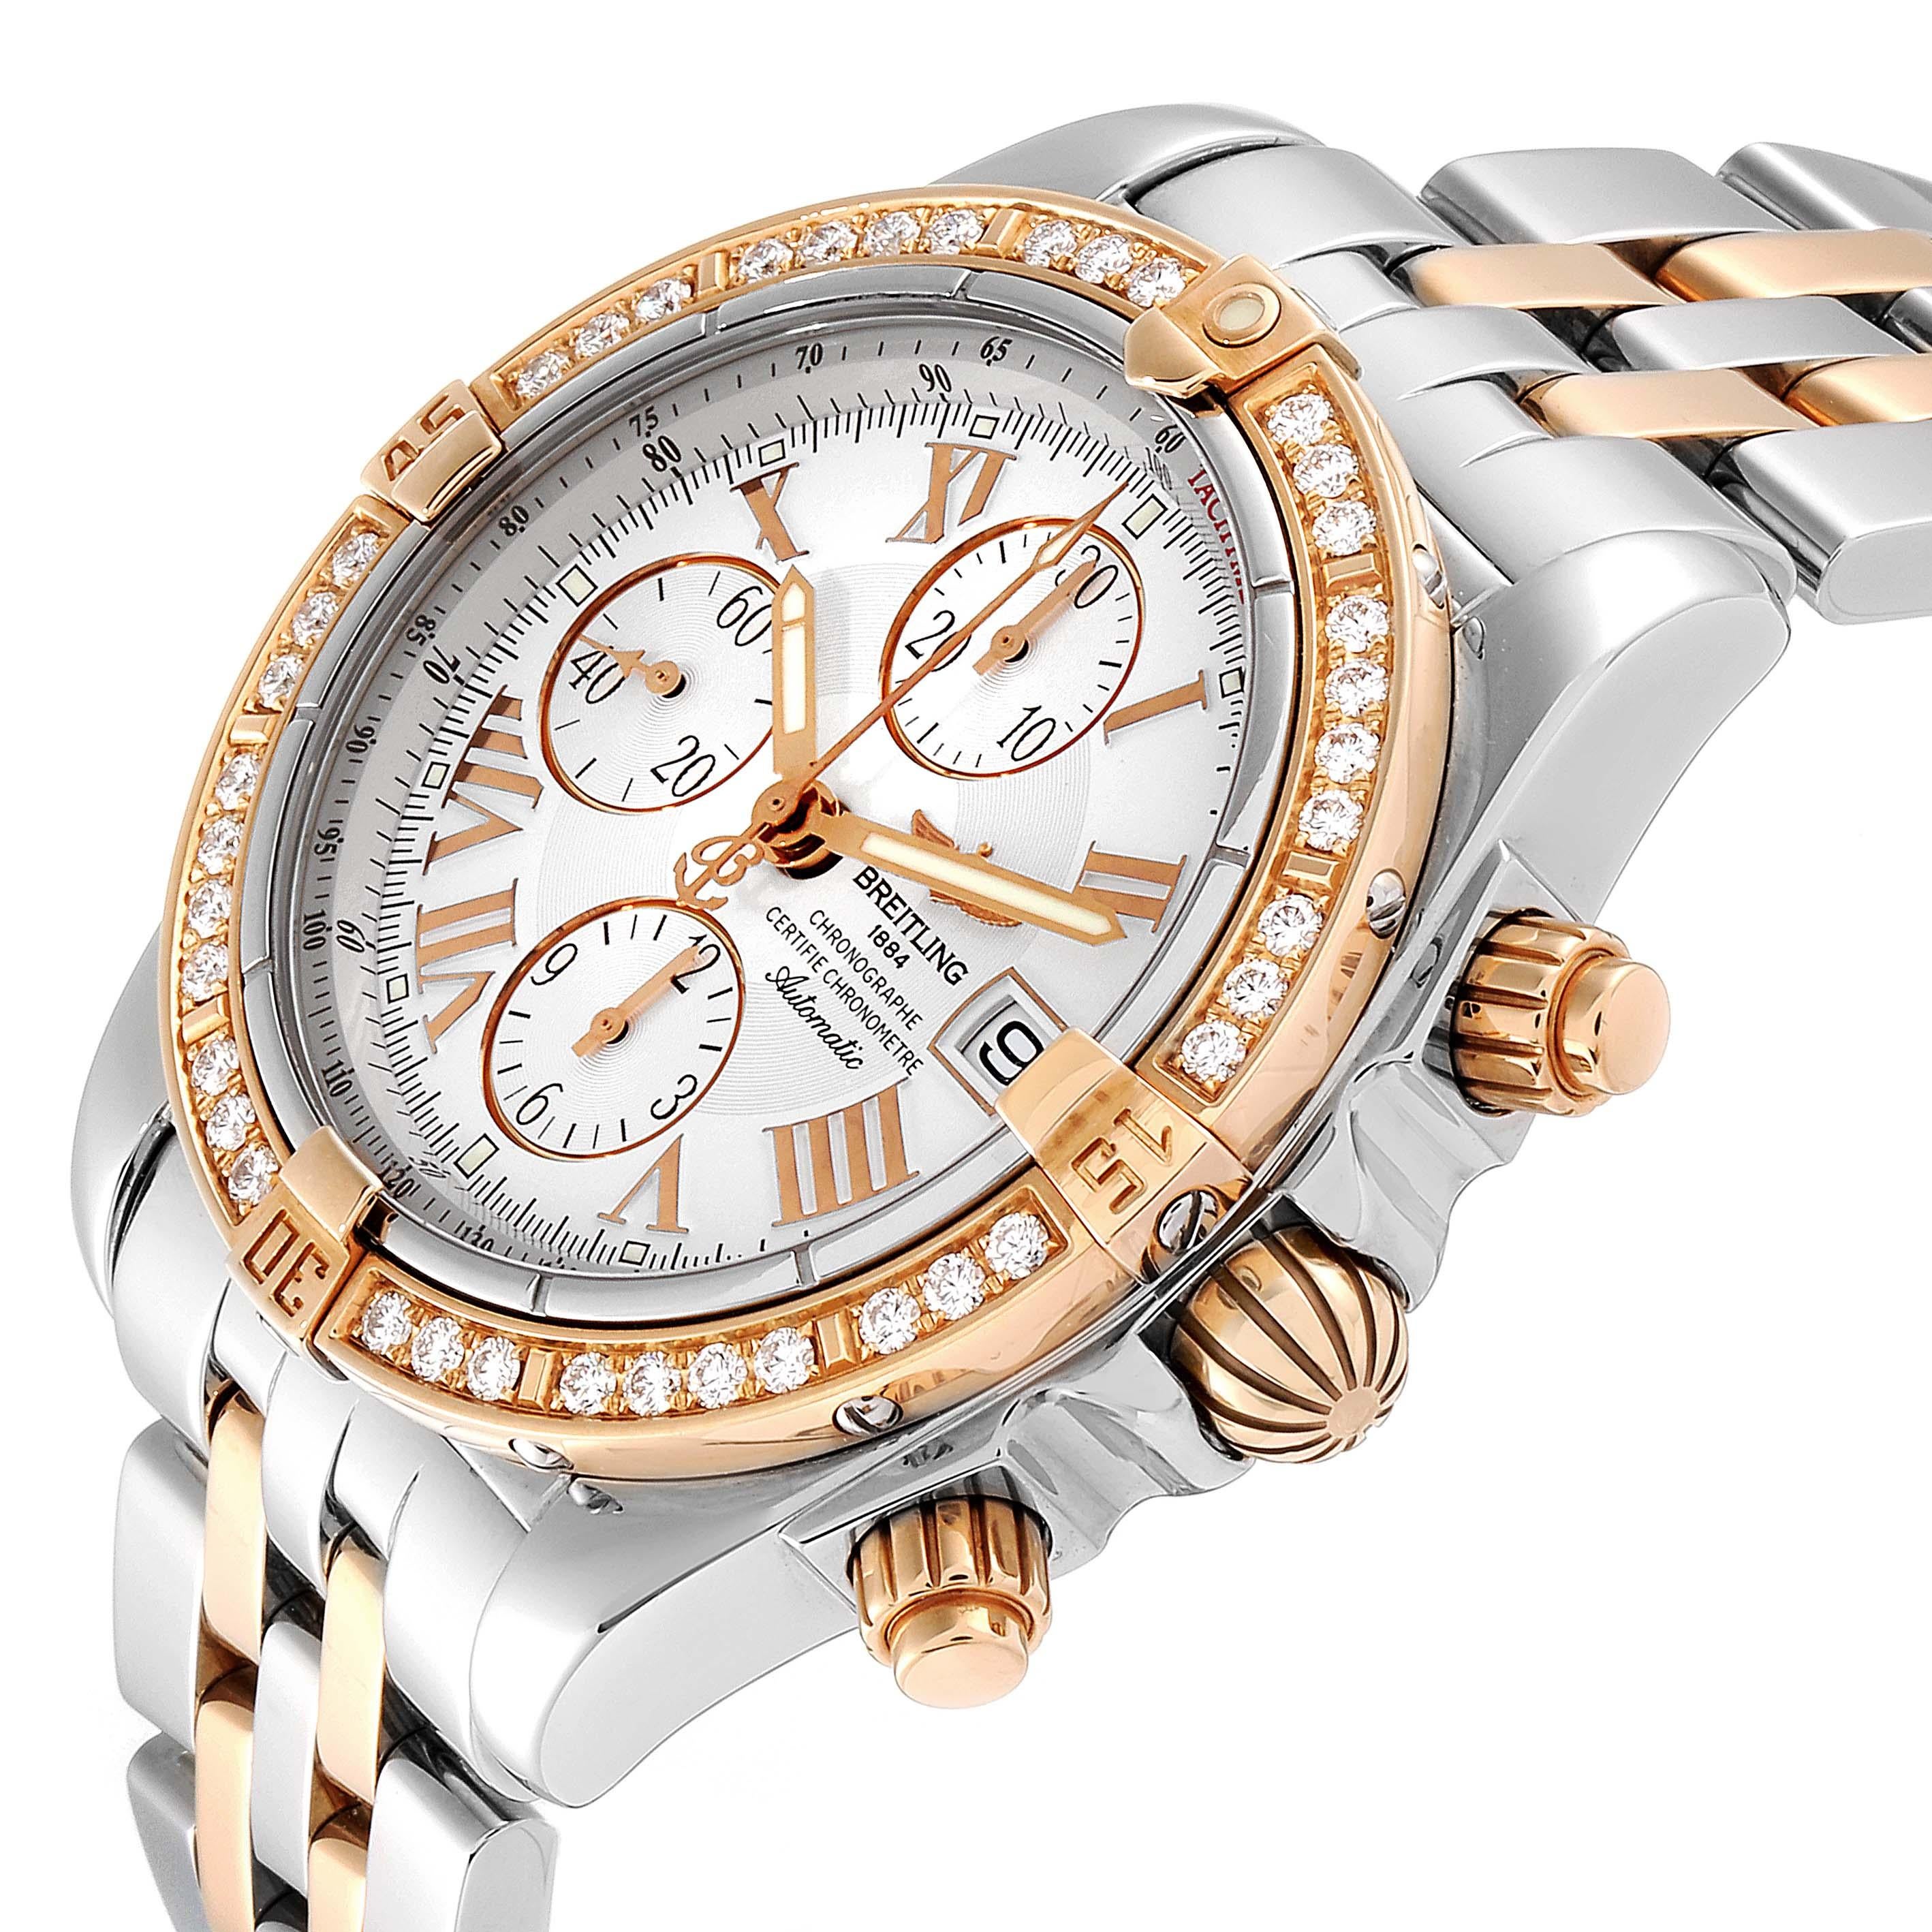 Breitling Chronomat Evolution Steel Rose Gold Diamond Watch C13356 In Excellent Condition For Sale In Atlanta, GA